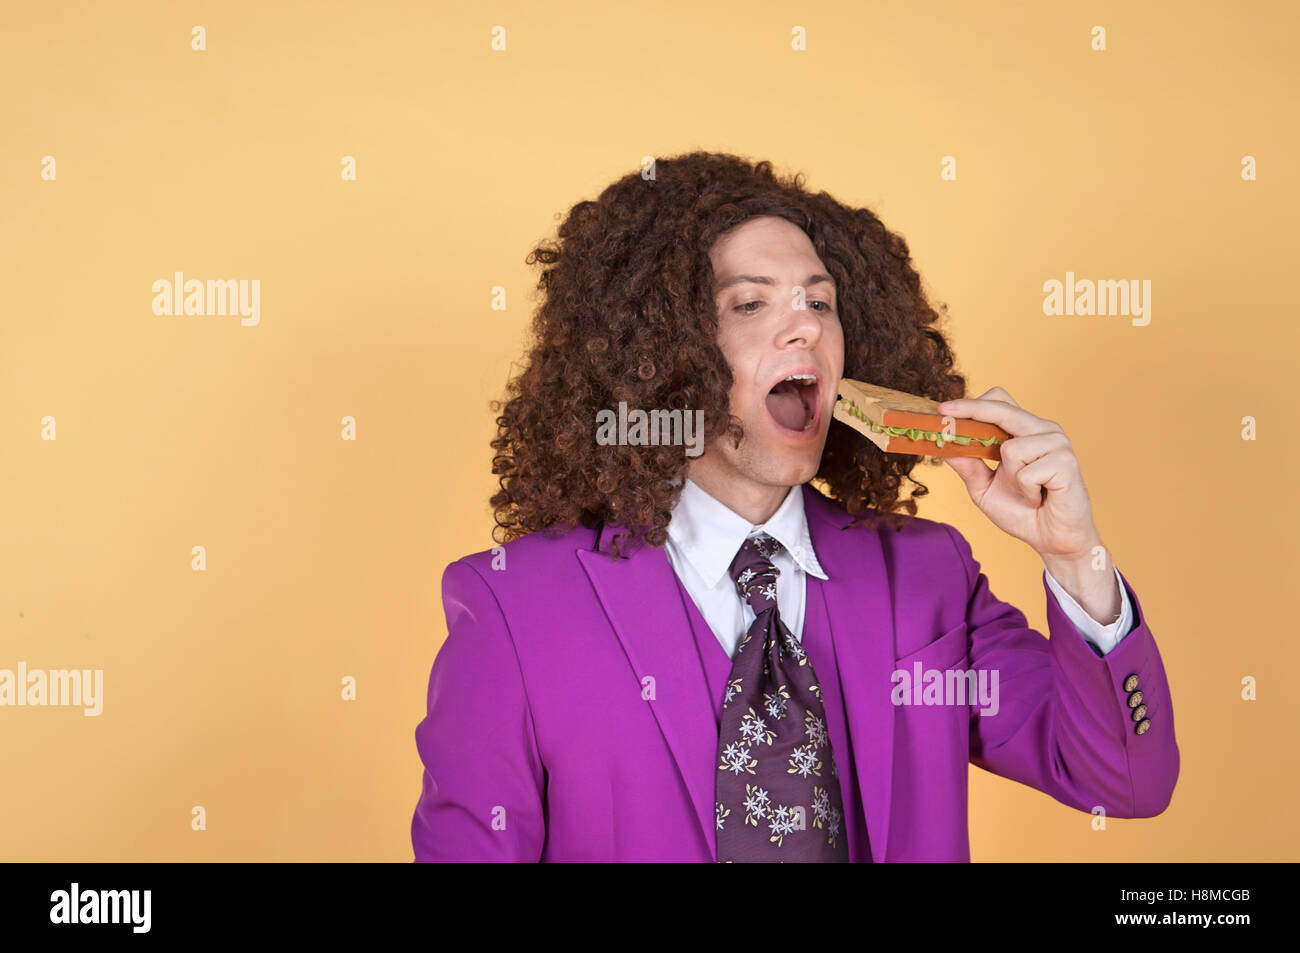 Caucasian man with afro wearing Purple Suit eating sandwich Stock Photo